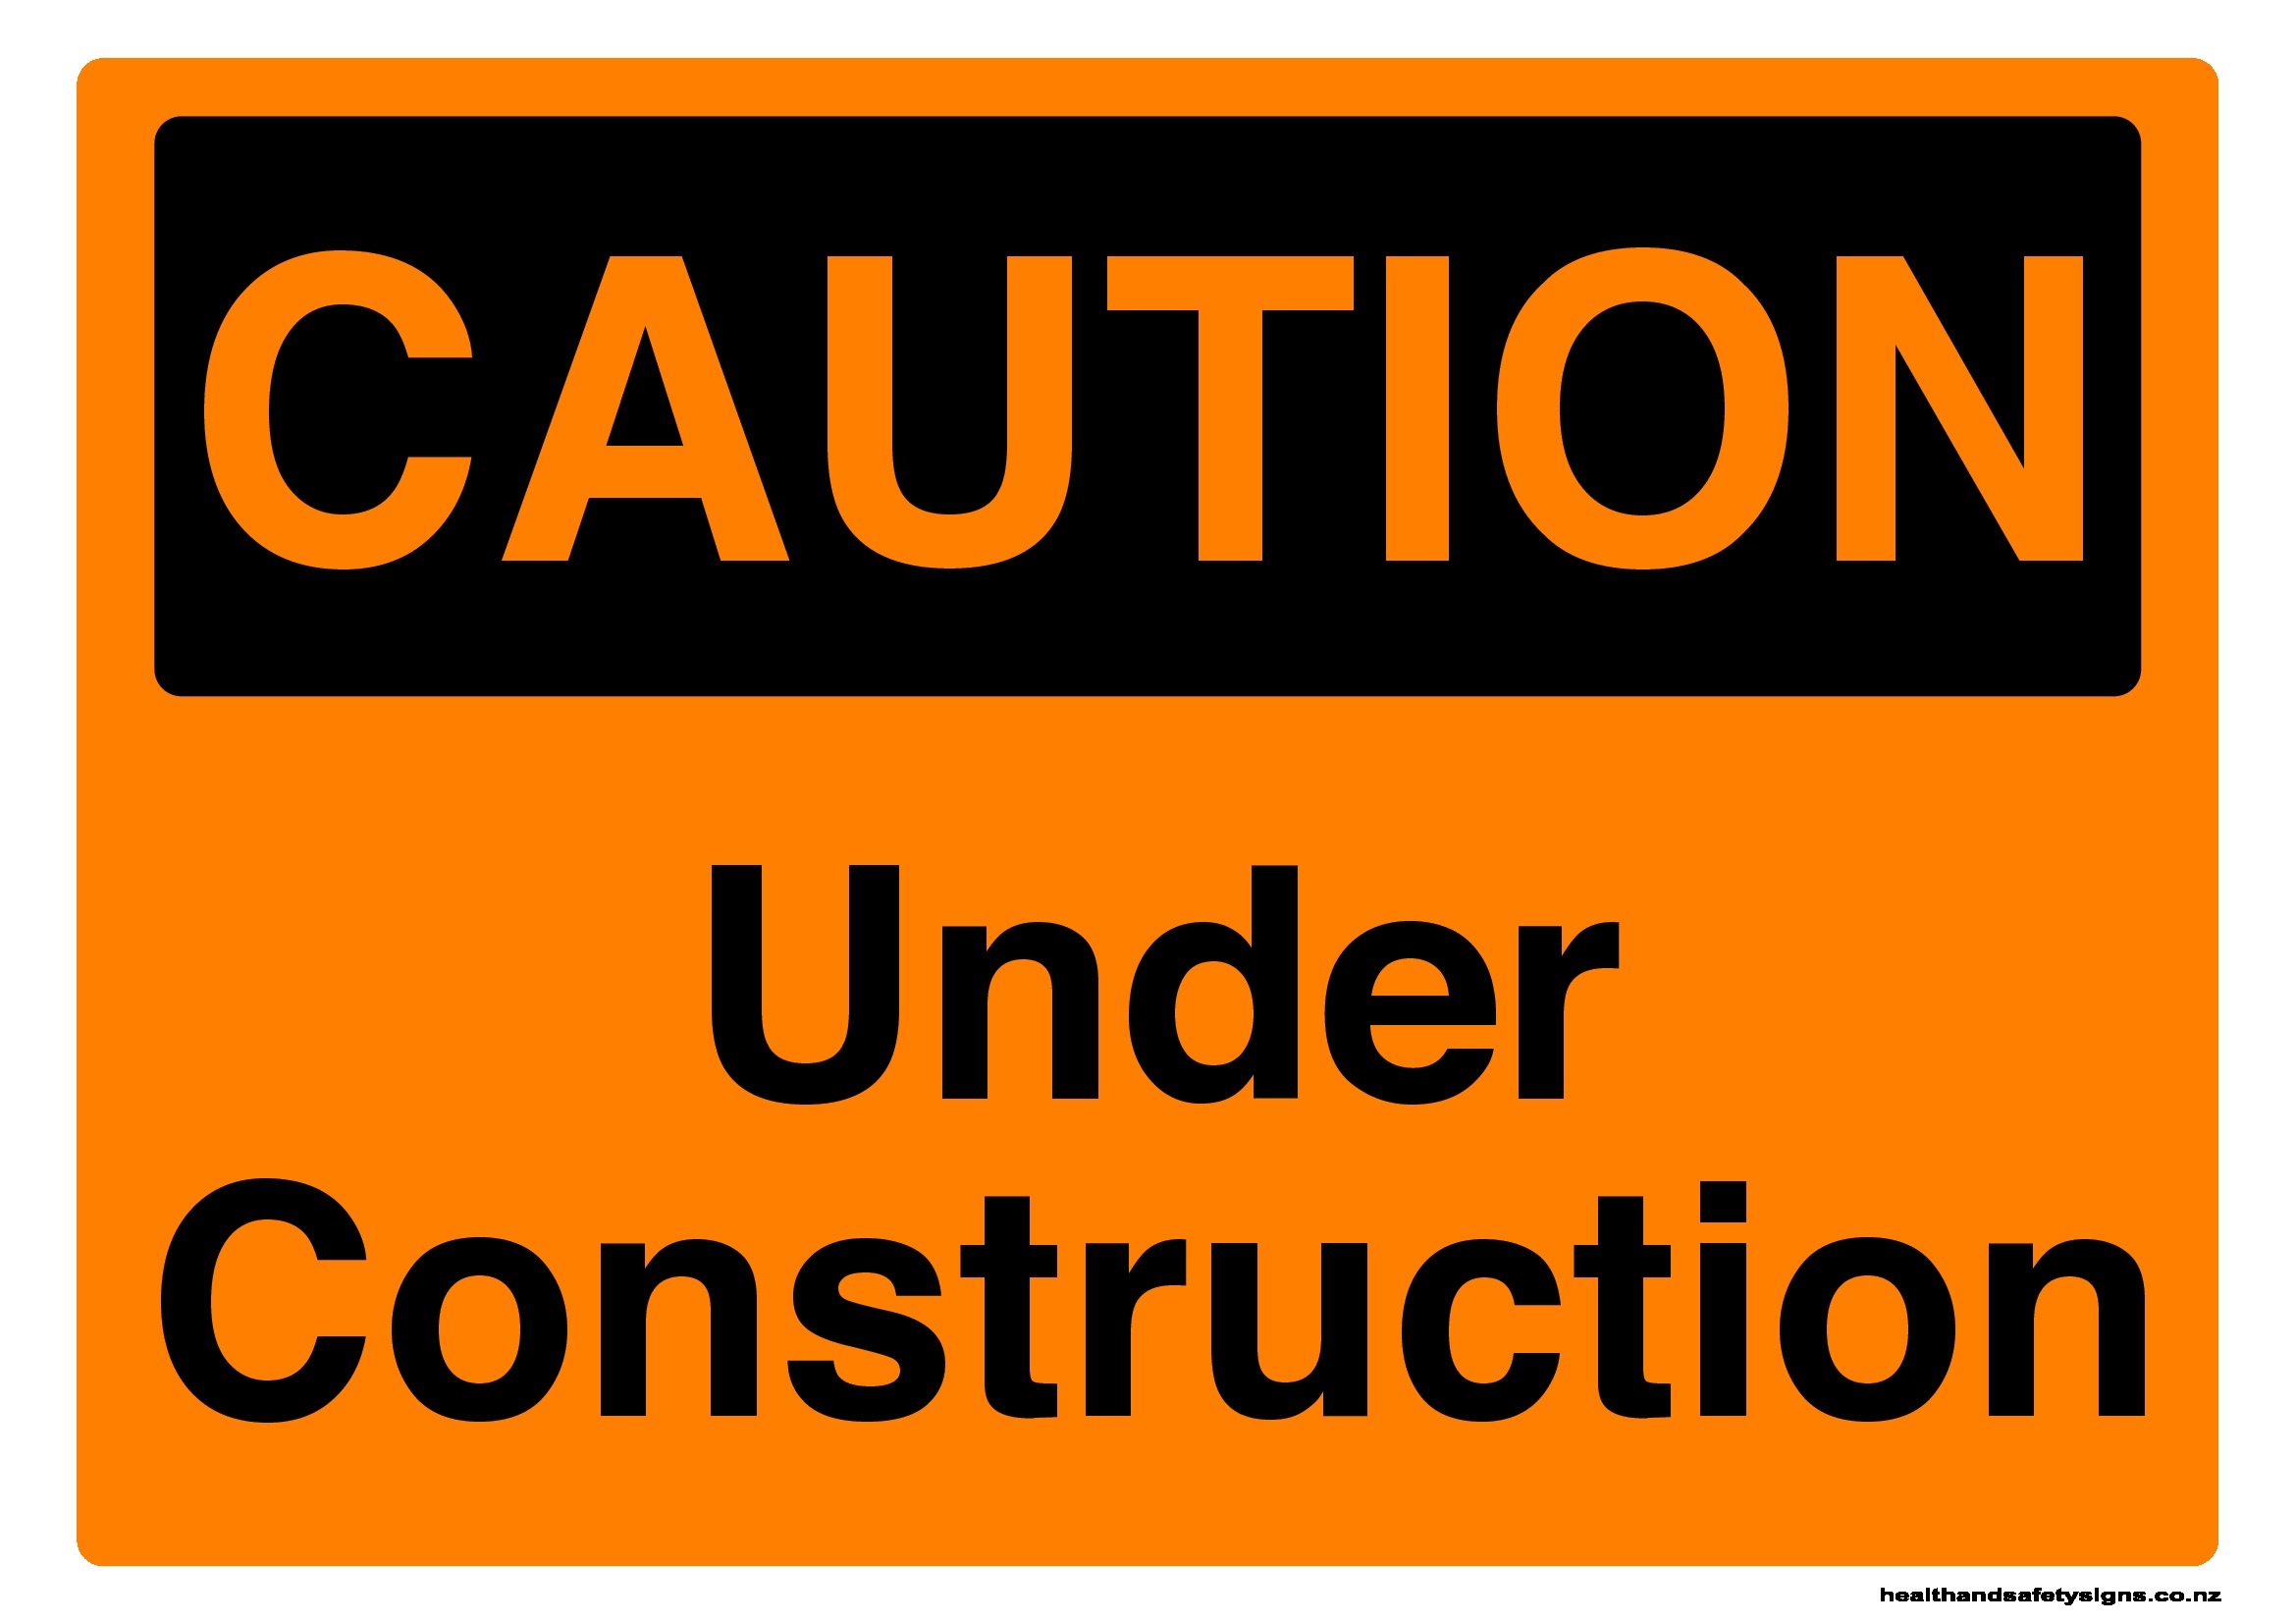 Under construction caution sign - Health and Safety Signs